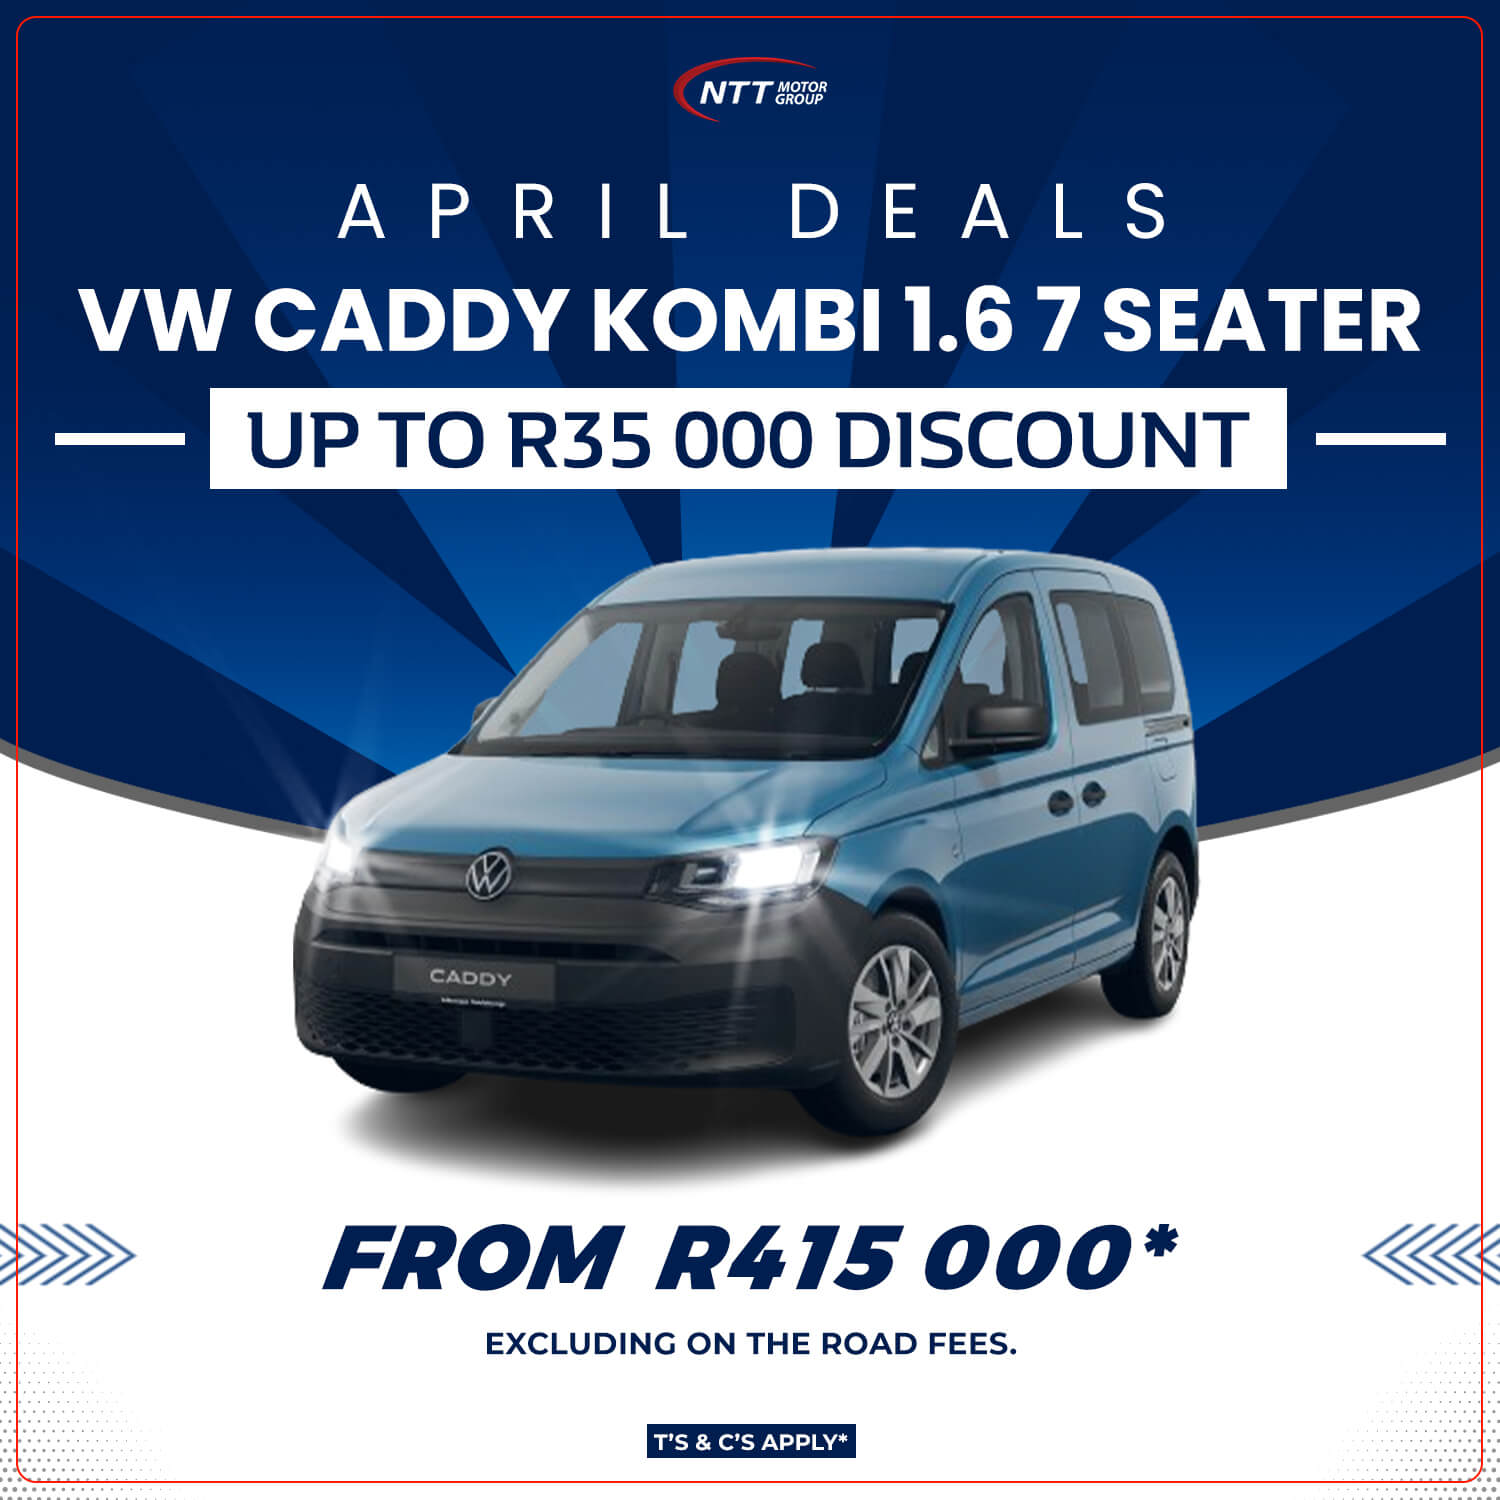 VW CADDY KOMBI 1.6 7 SEATER - NTT Volkswagen - New, Used & Demo Cars for Sale in South Africa